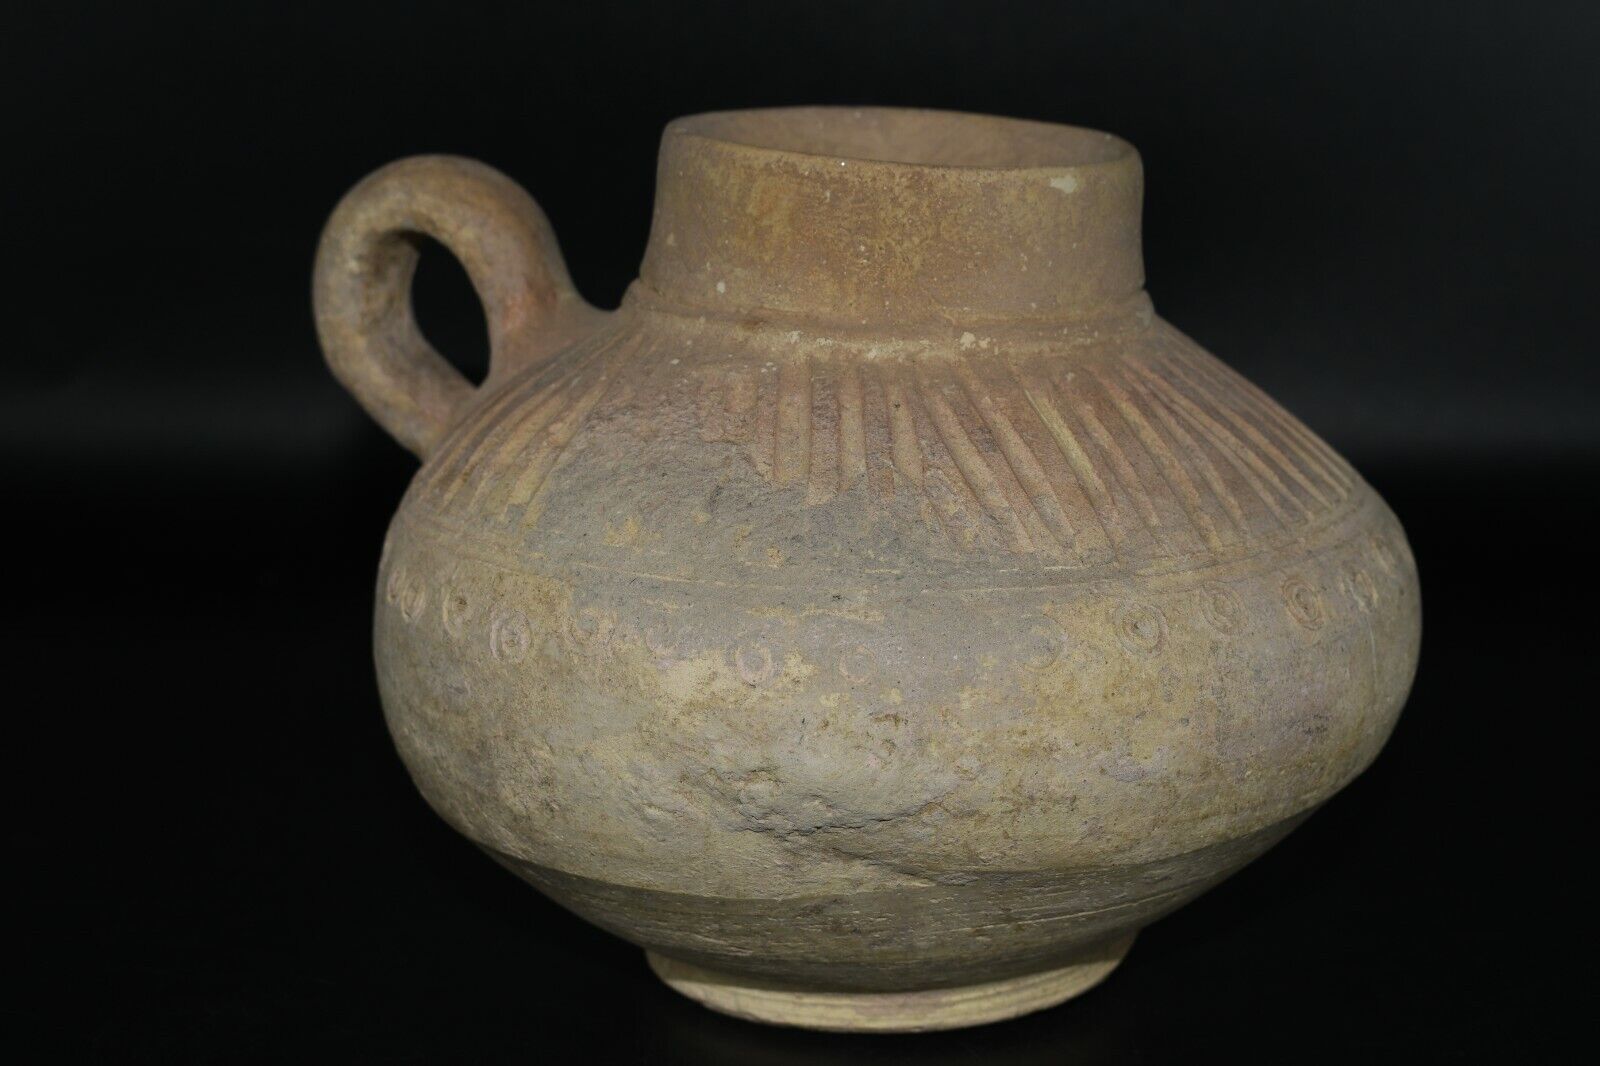 A Large Early Islamic Unglazed Pottery Vessel with Handle Ca. 12th/ 13th Century